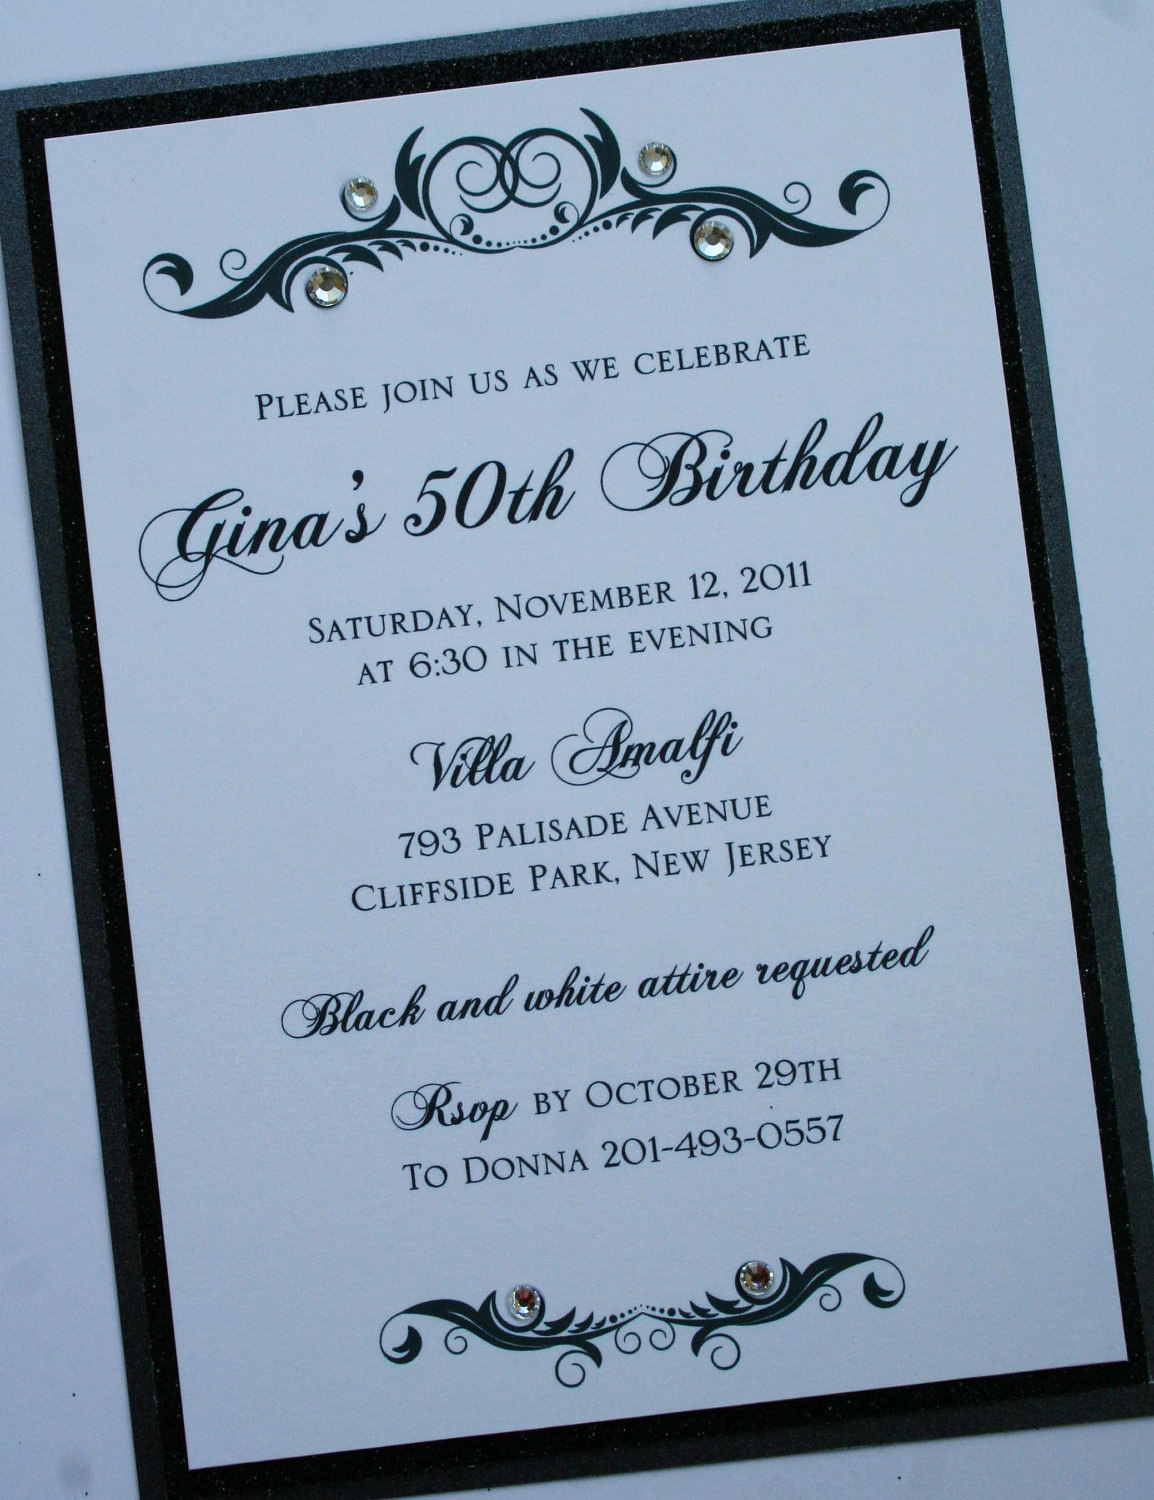 Invitation Message for Party Beautiful Black and White Elegance formal Birthday Invitation